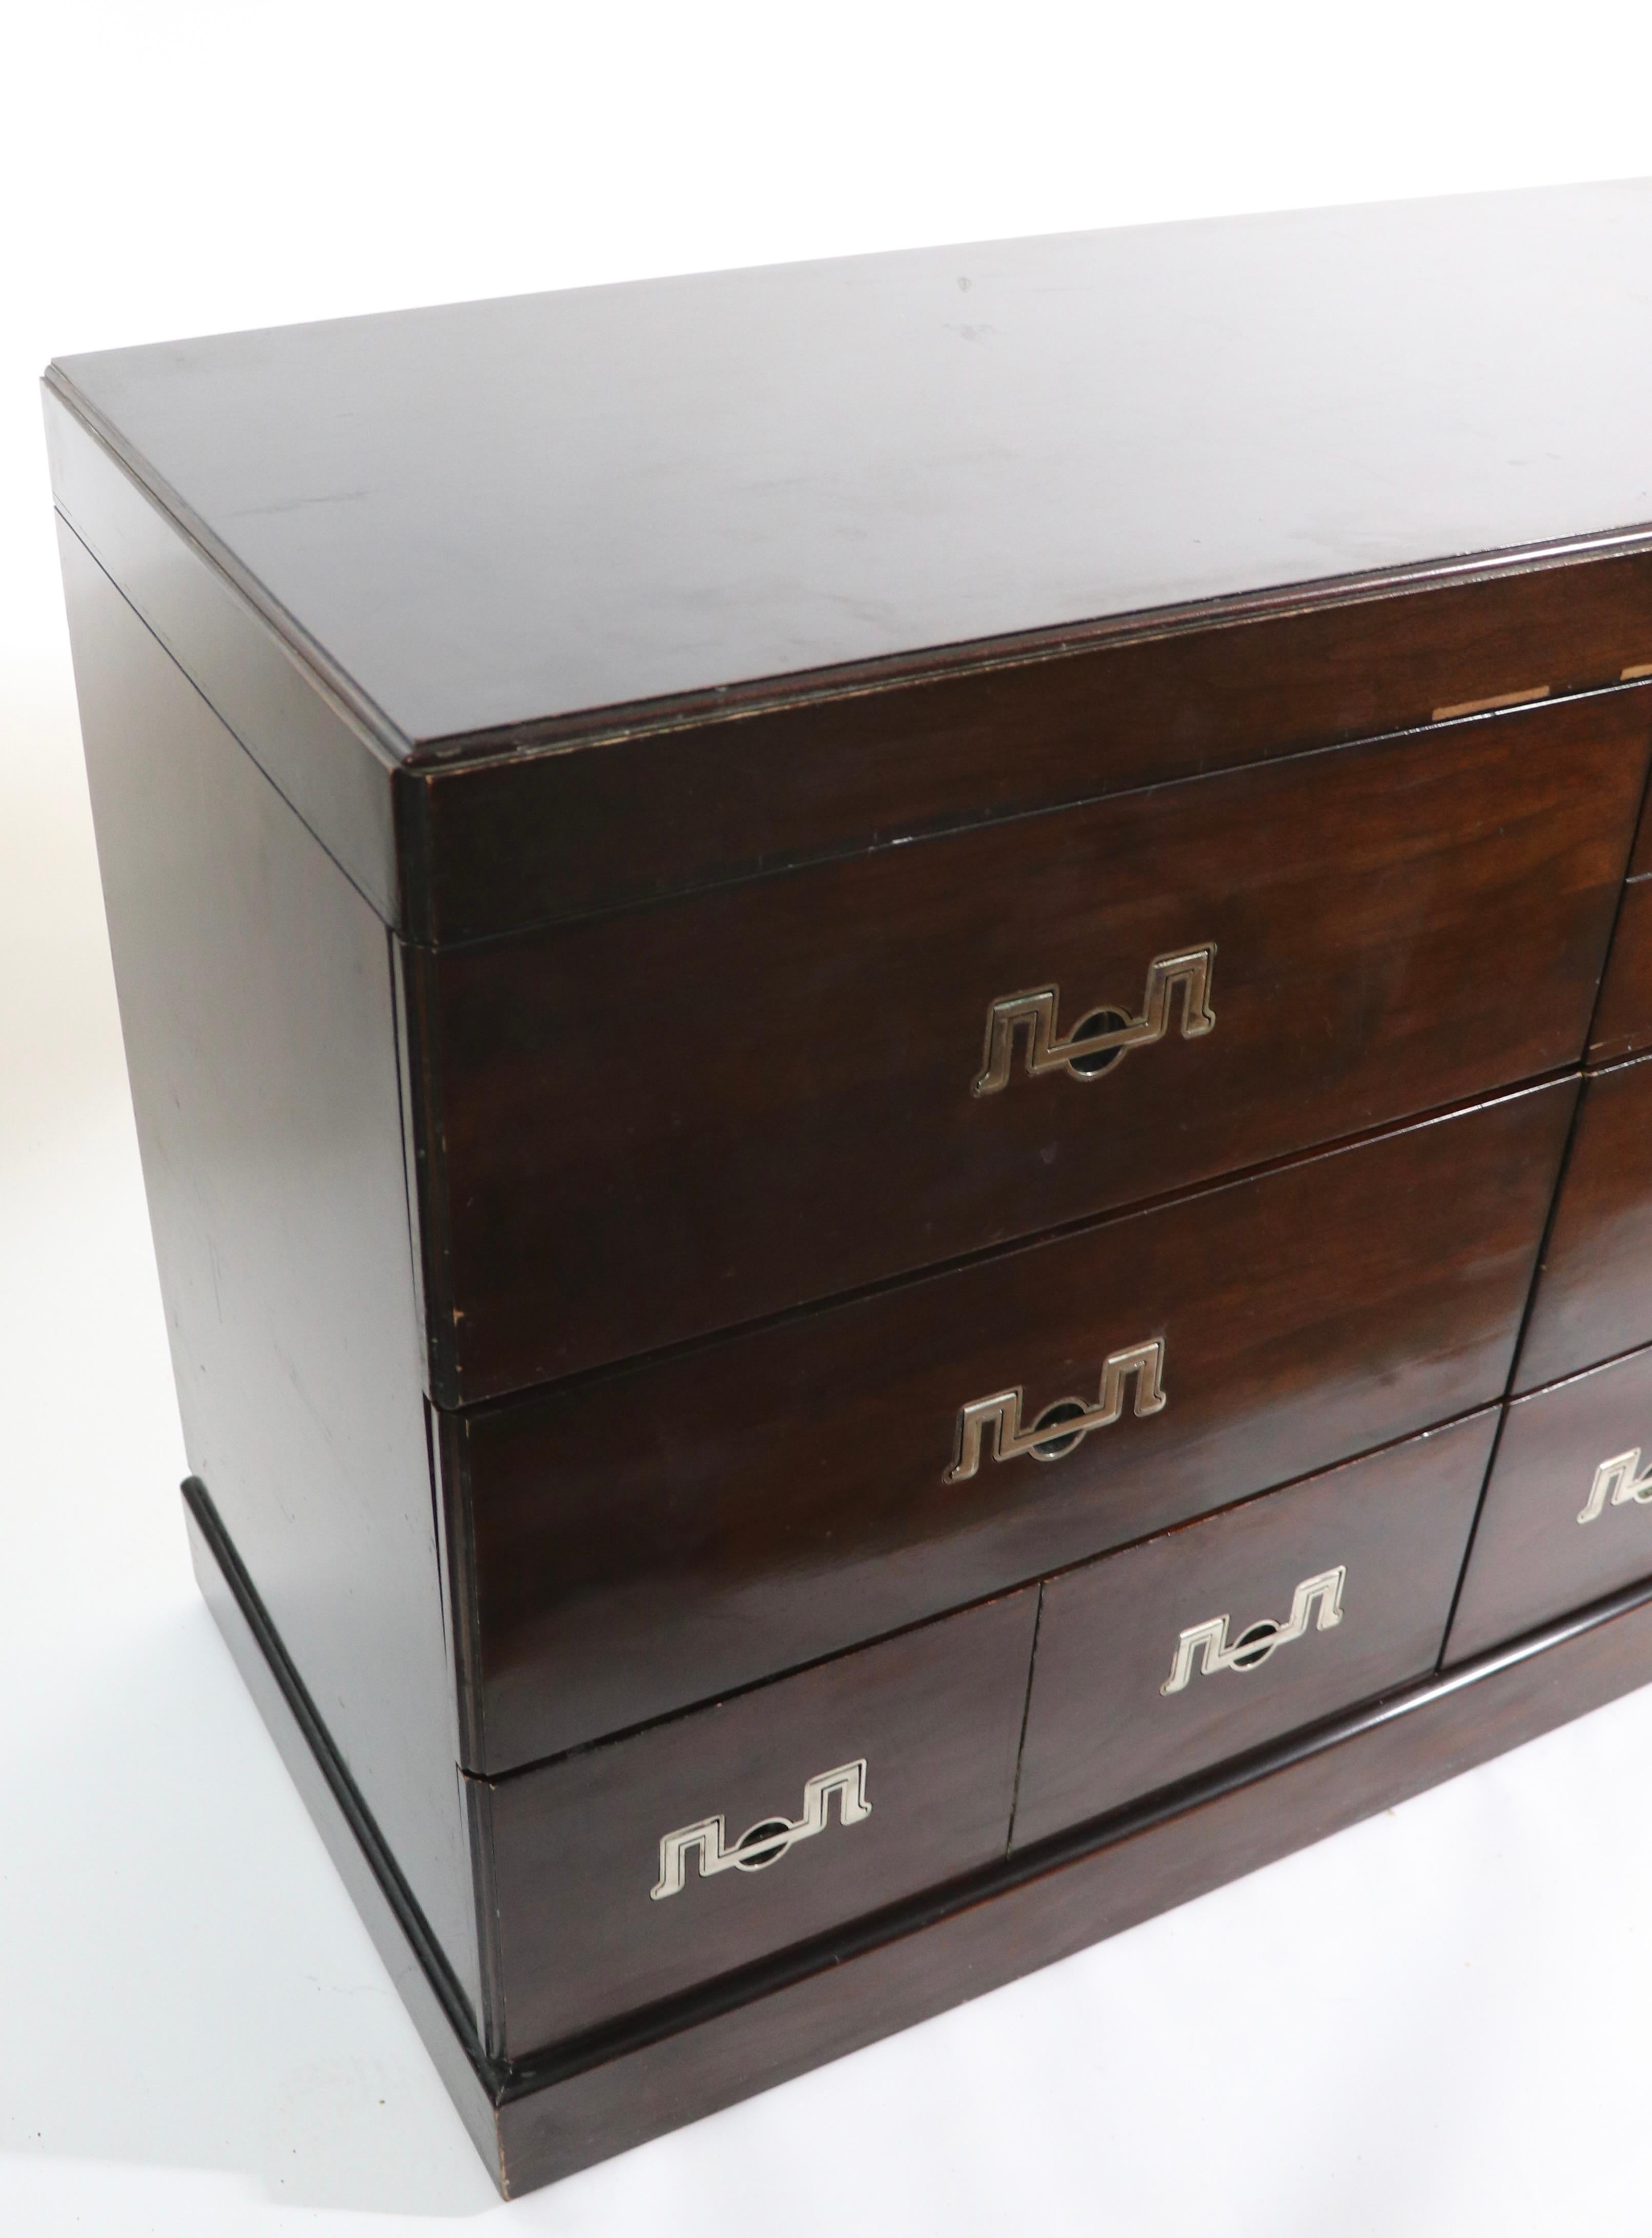 Massive and impressive Henredon triple dresser, having three banks of three drawers, each with a stylized chrome bale form handle. The dresser is even in color ( dark ), the lighting in the images is uneven. The case is of dark mahogany in gloss